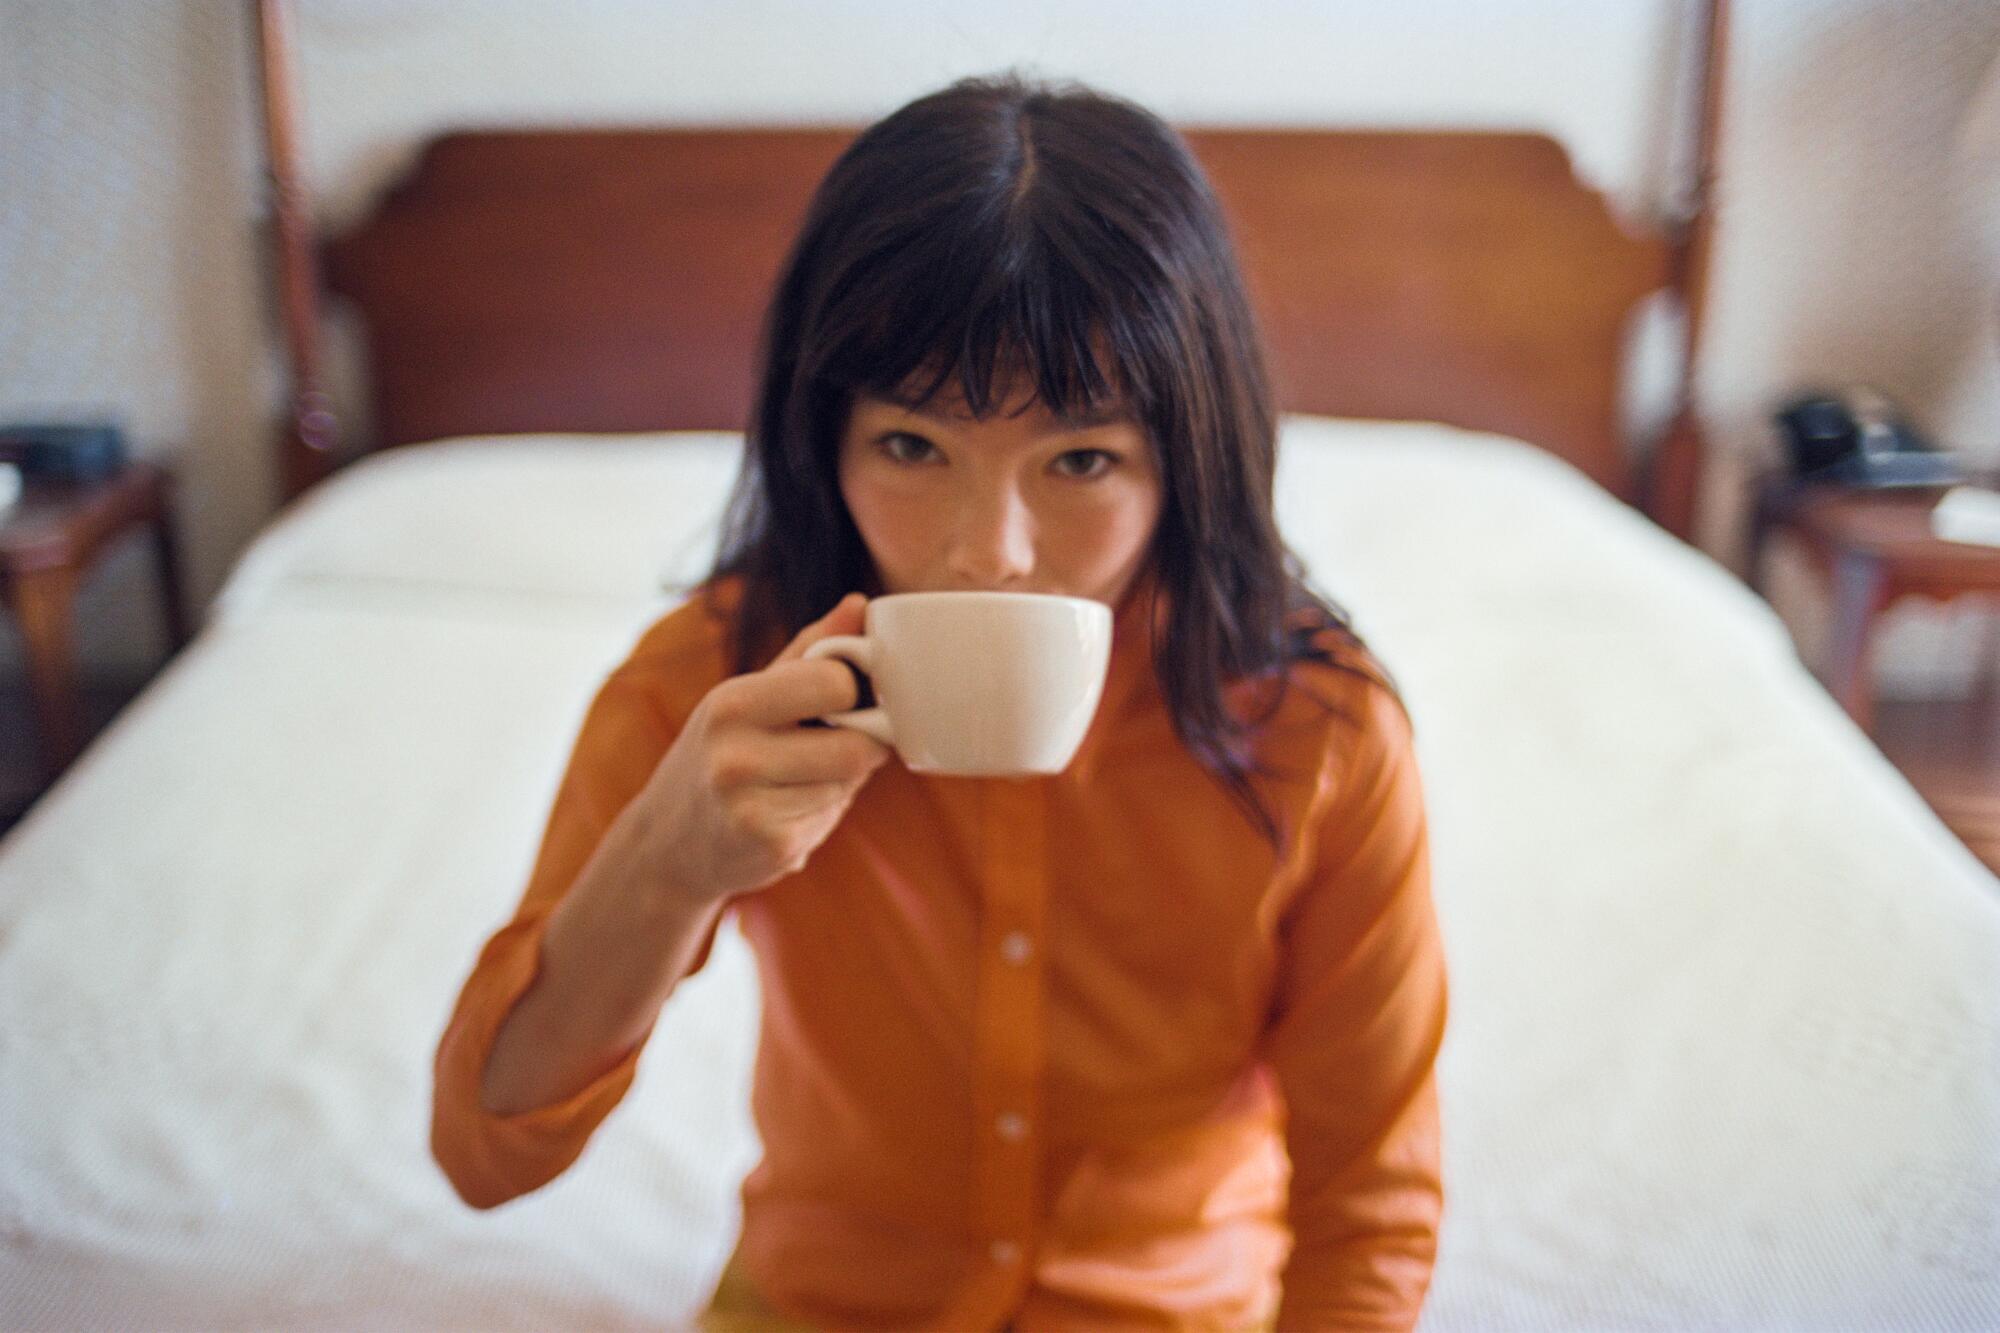 Bjrk sits on the edge of a bed, wearing an orange sweater and drinking from a white coffee cup.